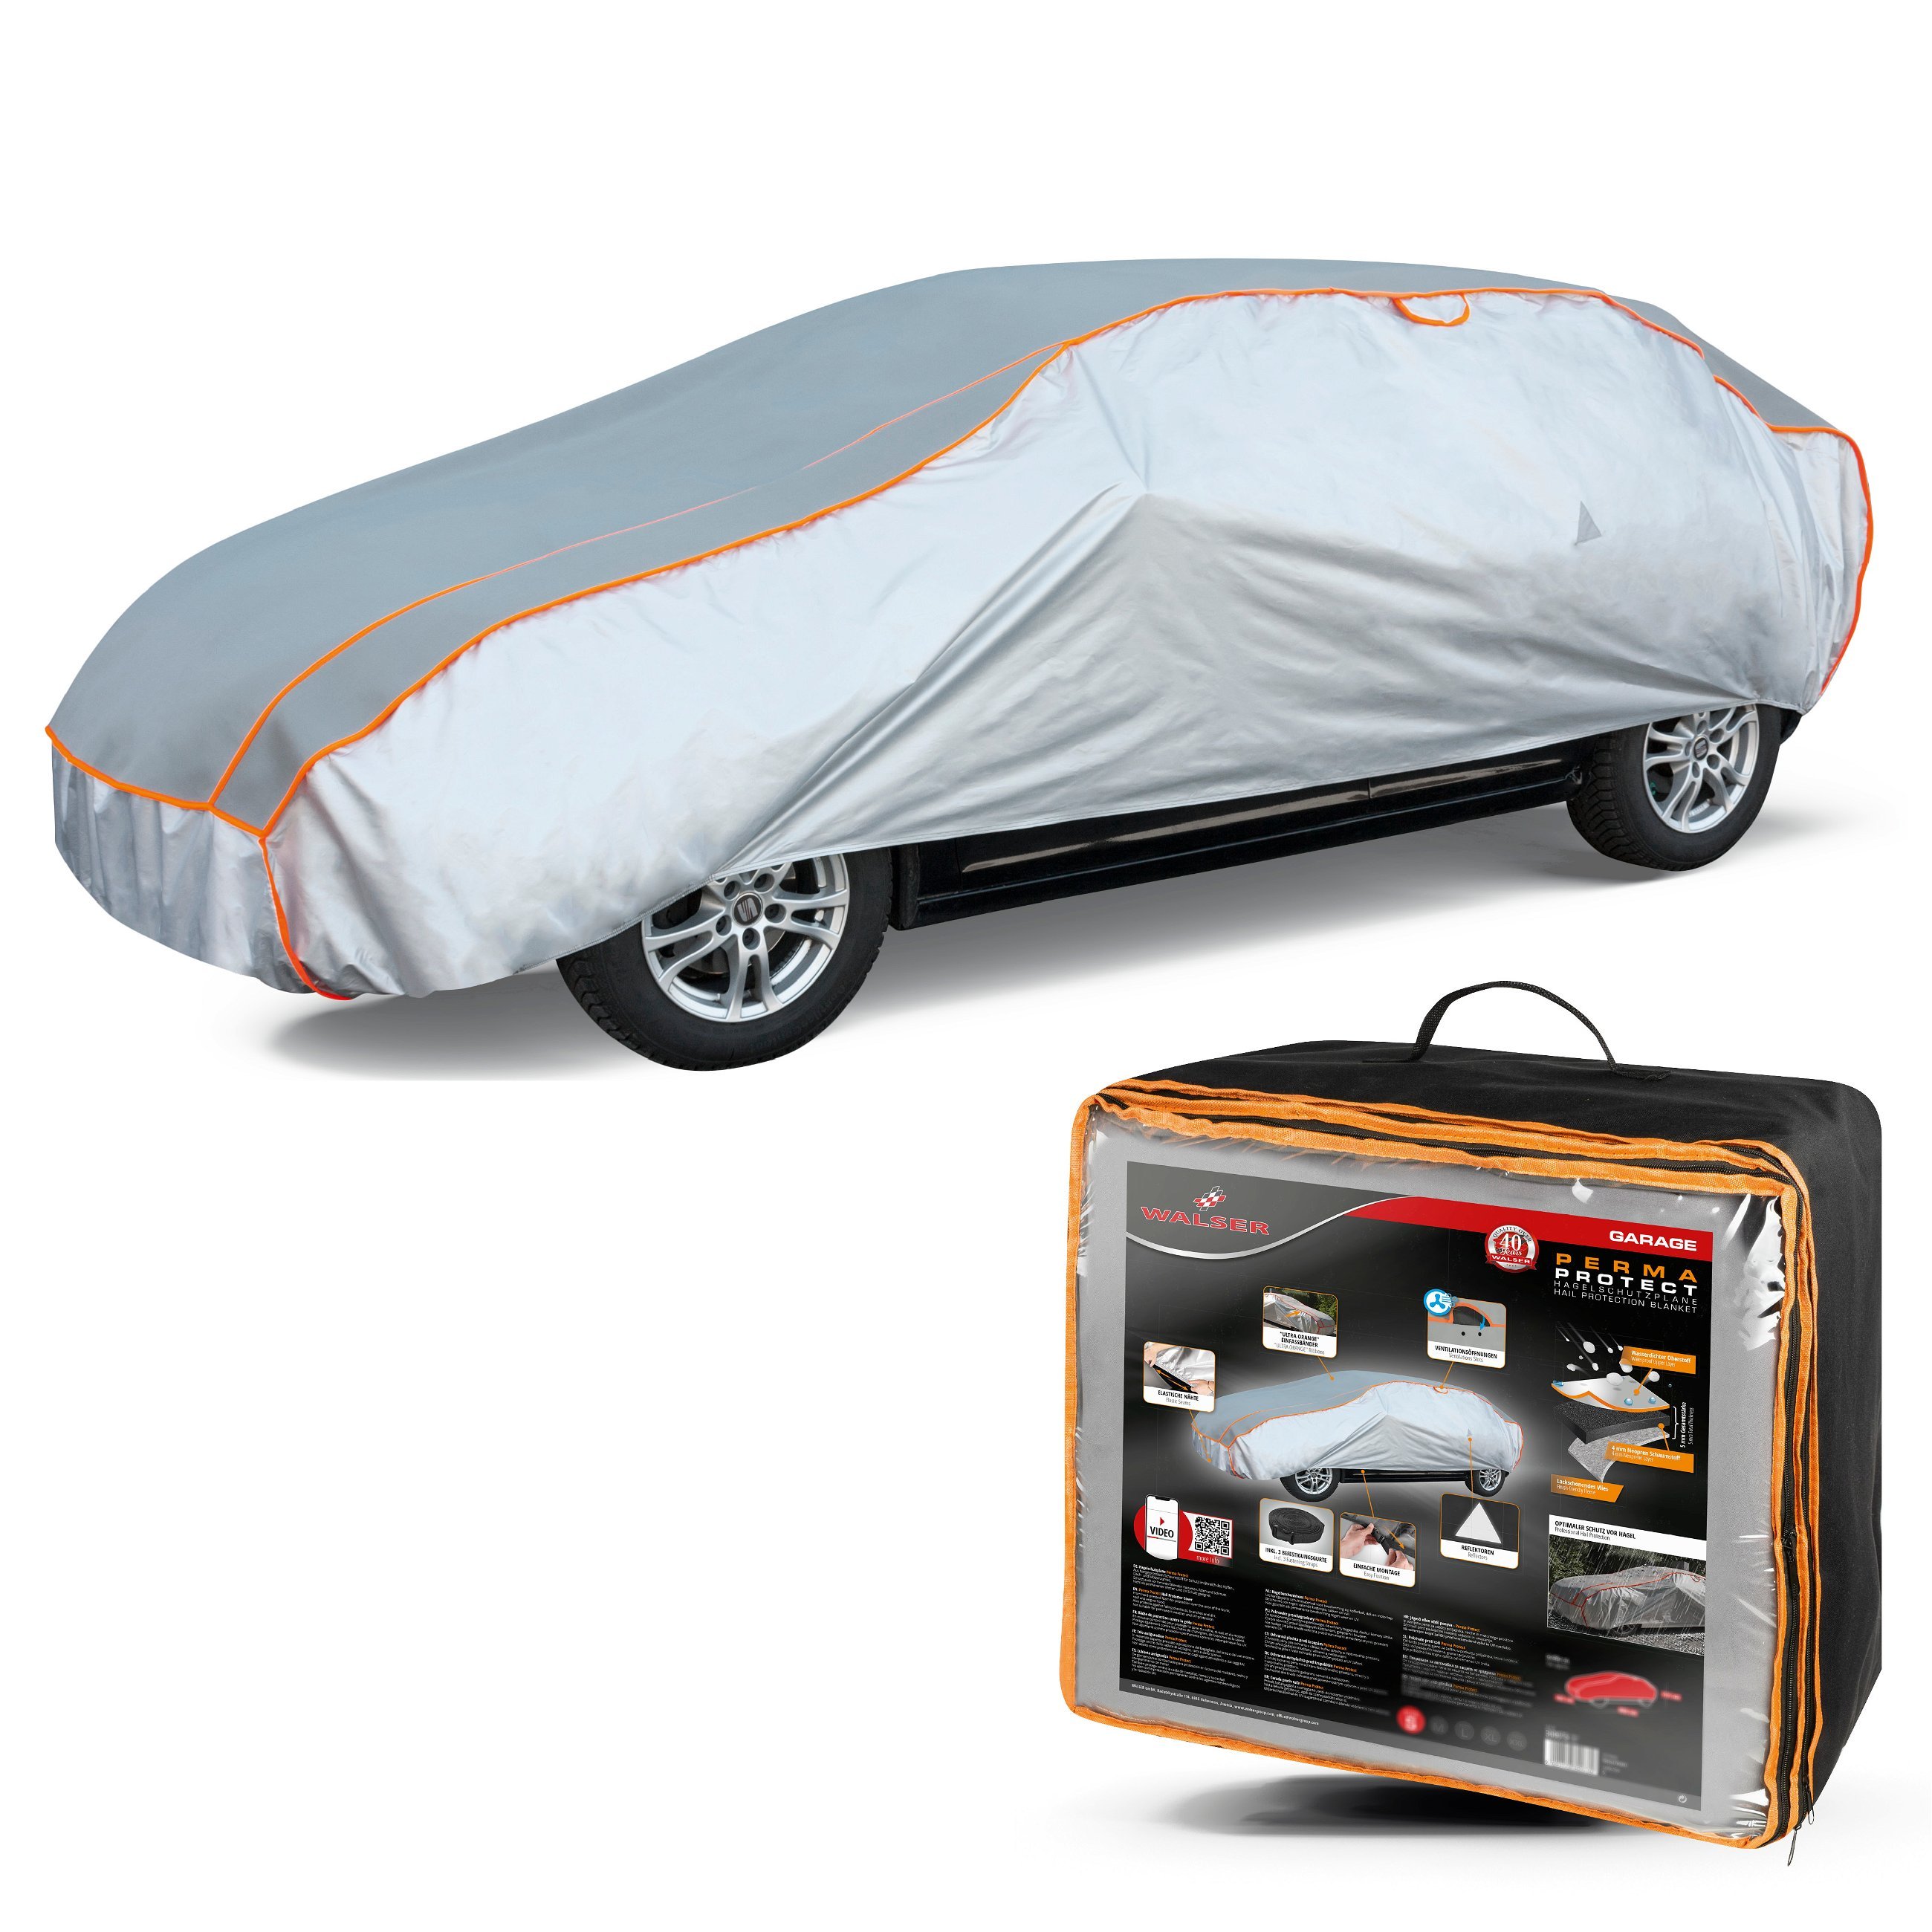 Car hail protection cover Perma Protect size XXL